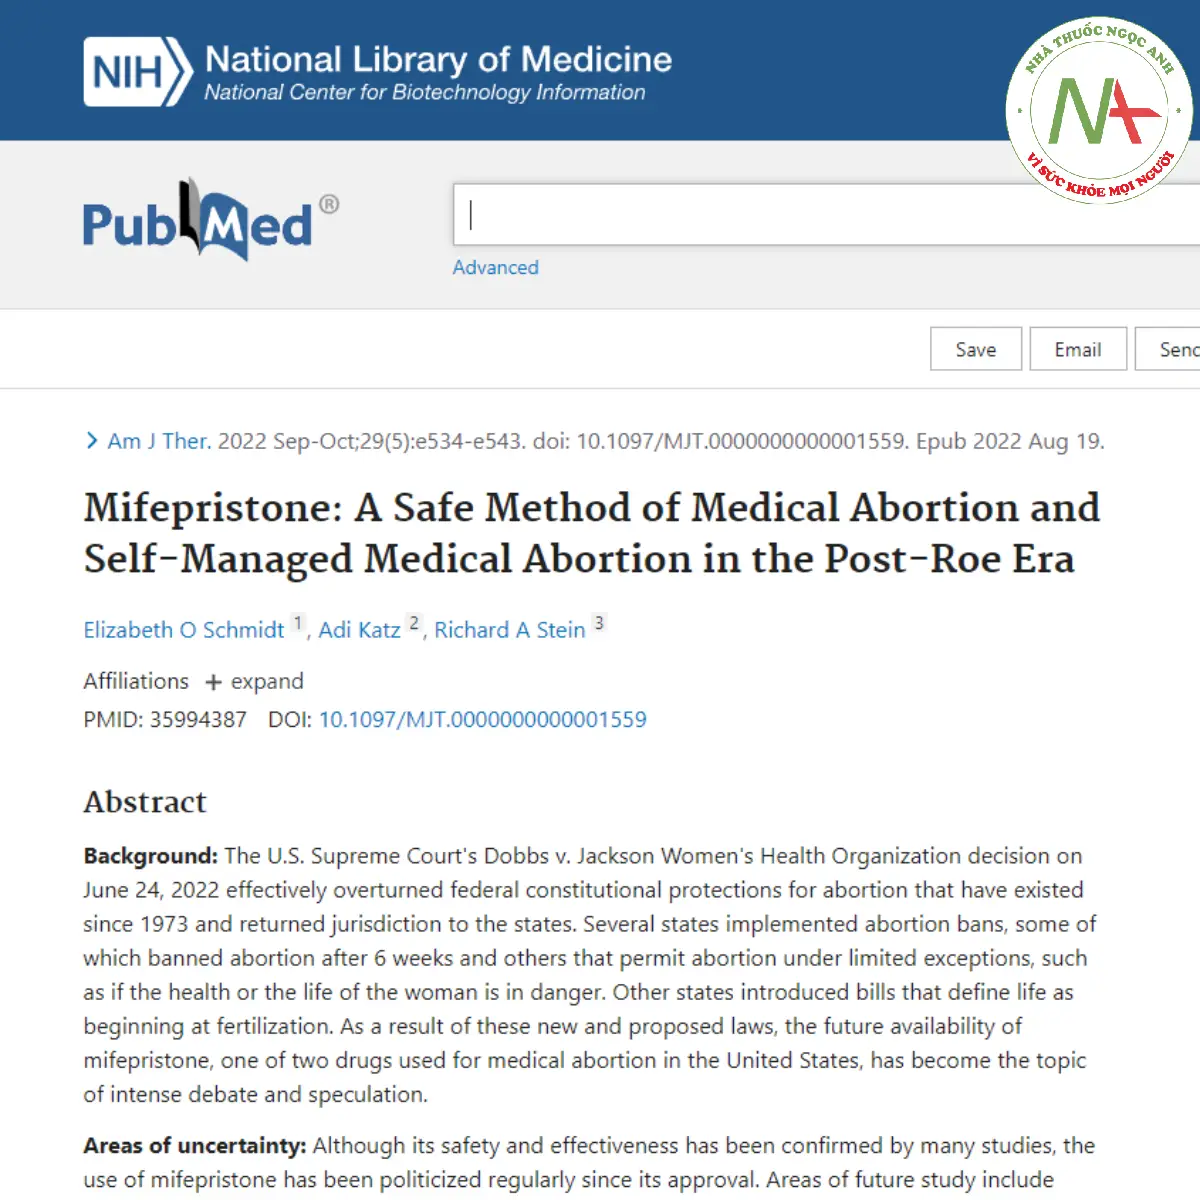 Mifepristone_ A Safe Method of Medical Abortion and Self-Managed Medical Abortion in the Post-Roe Era